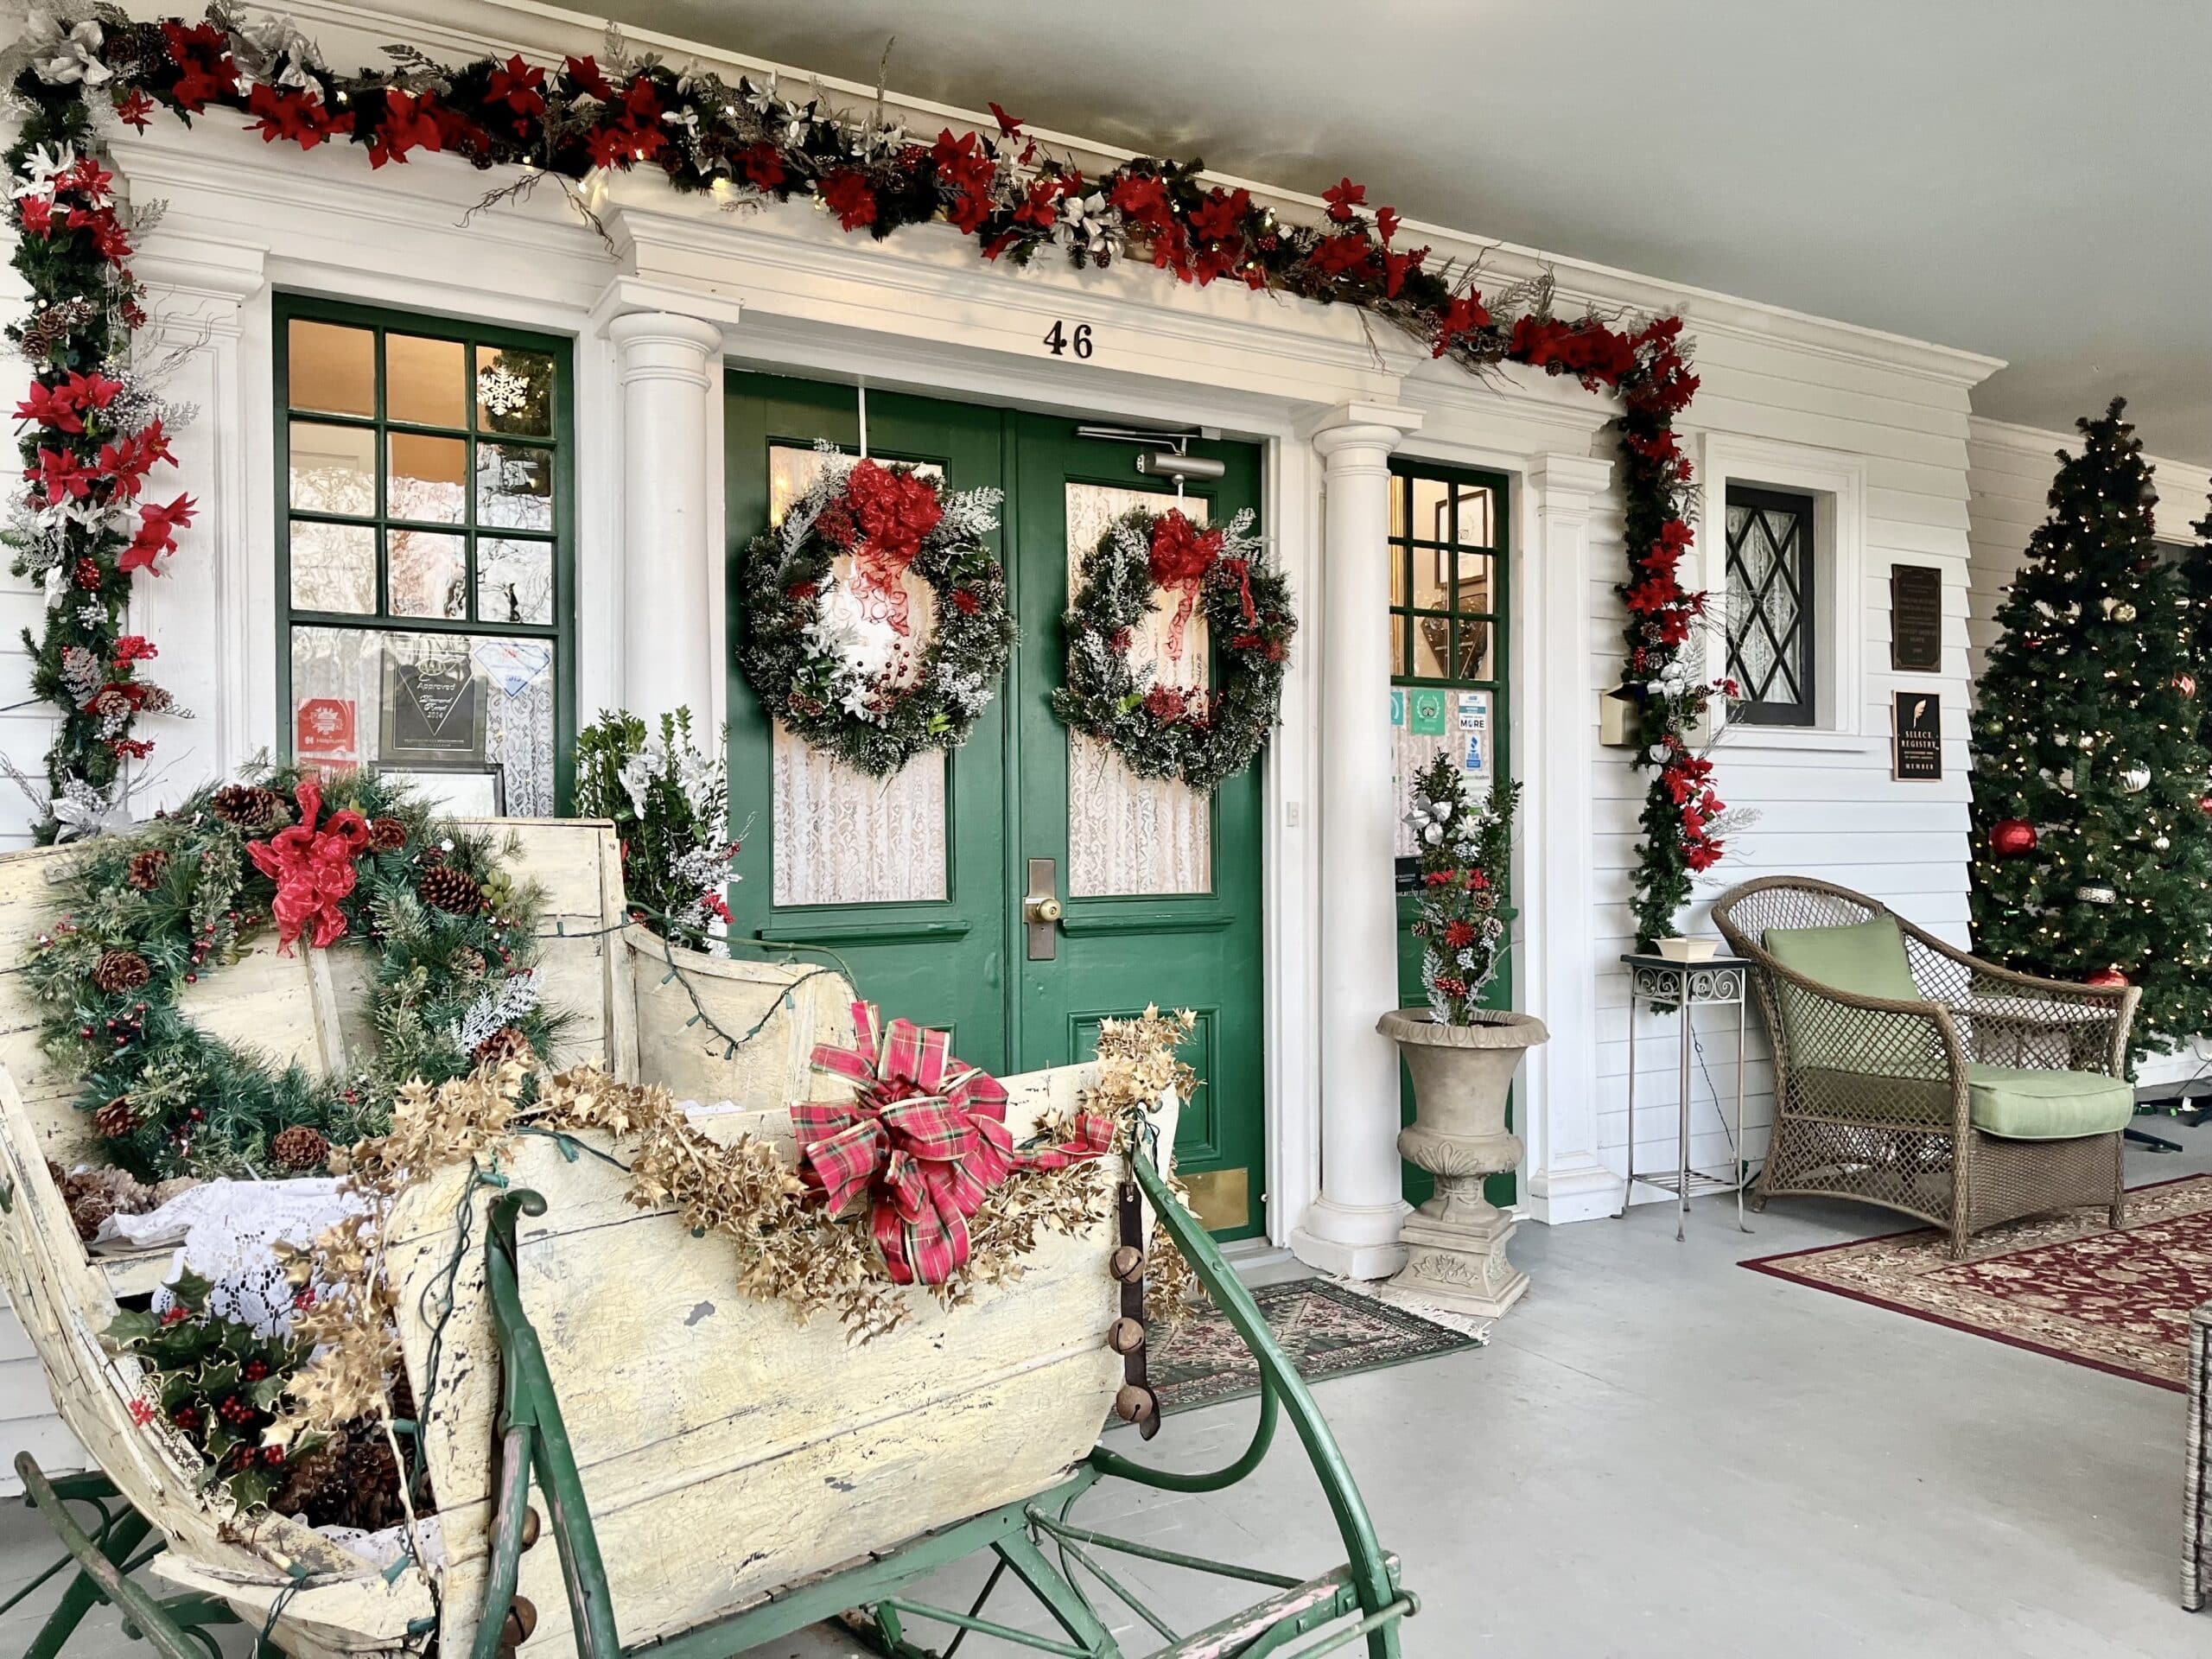 I set of doors on a porch that is decorated with garland and christmas wreaths